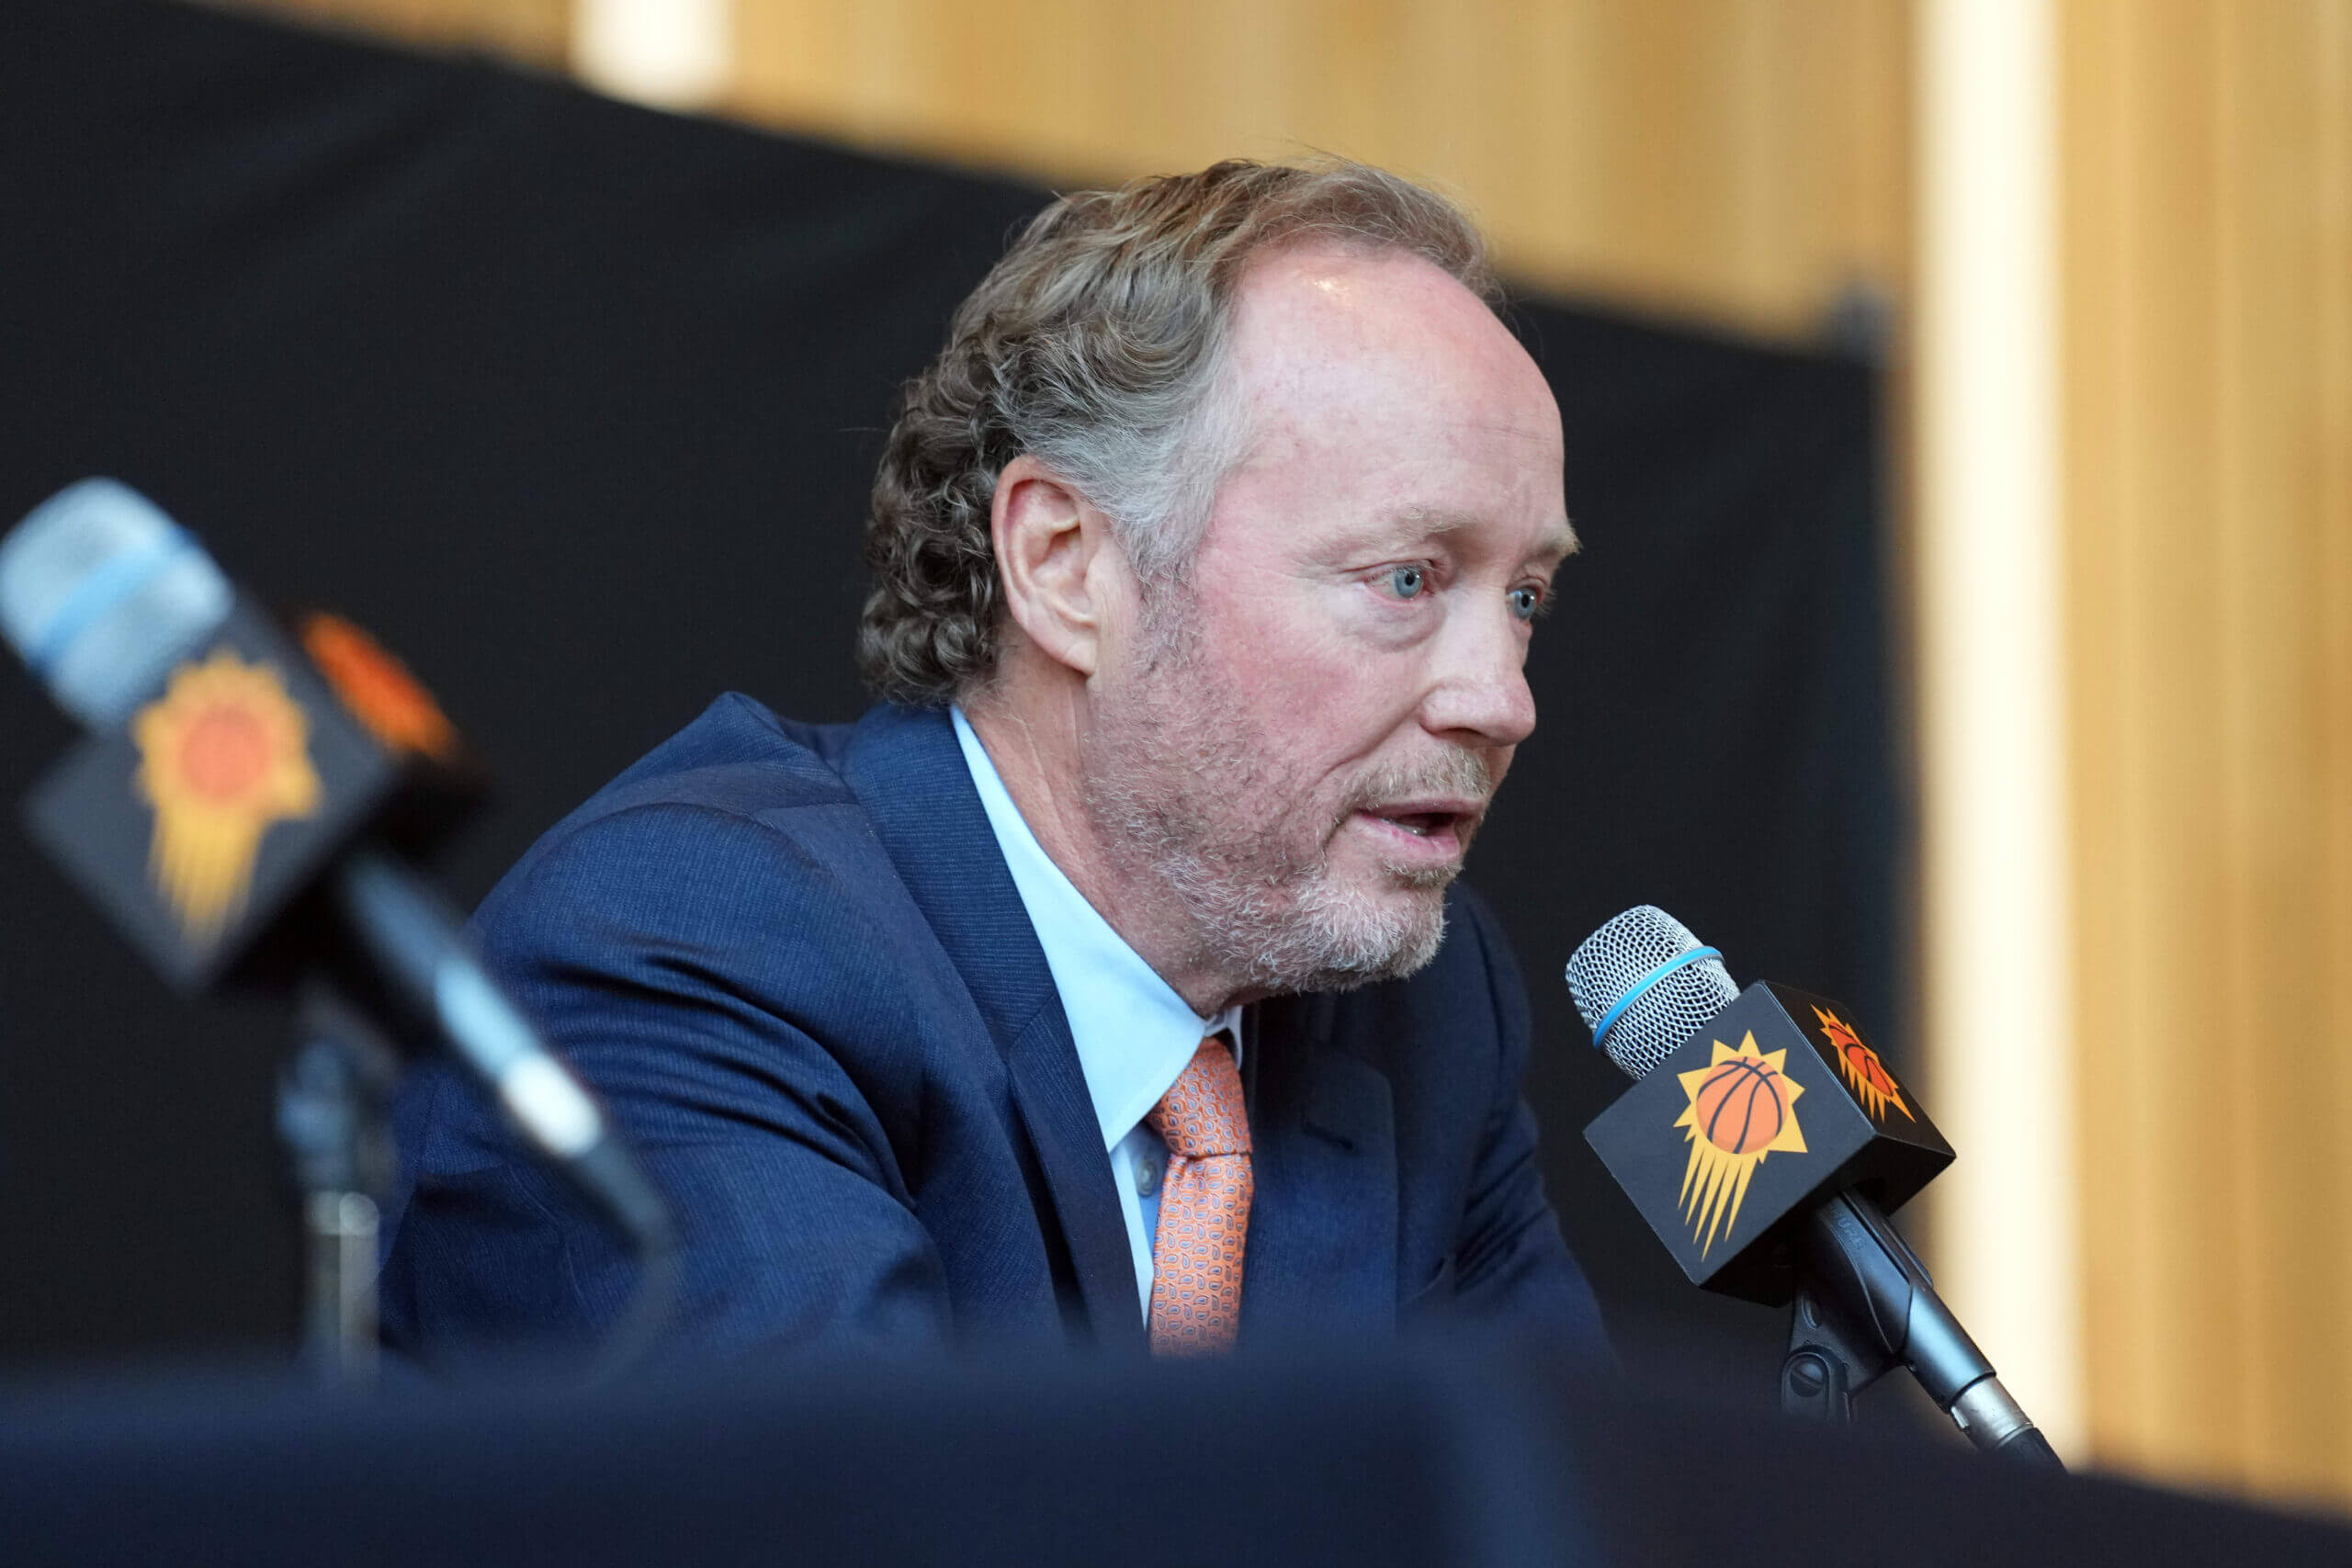 Mike Budenholzer is right where he wants to be — now can he make the Suns a contender?